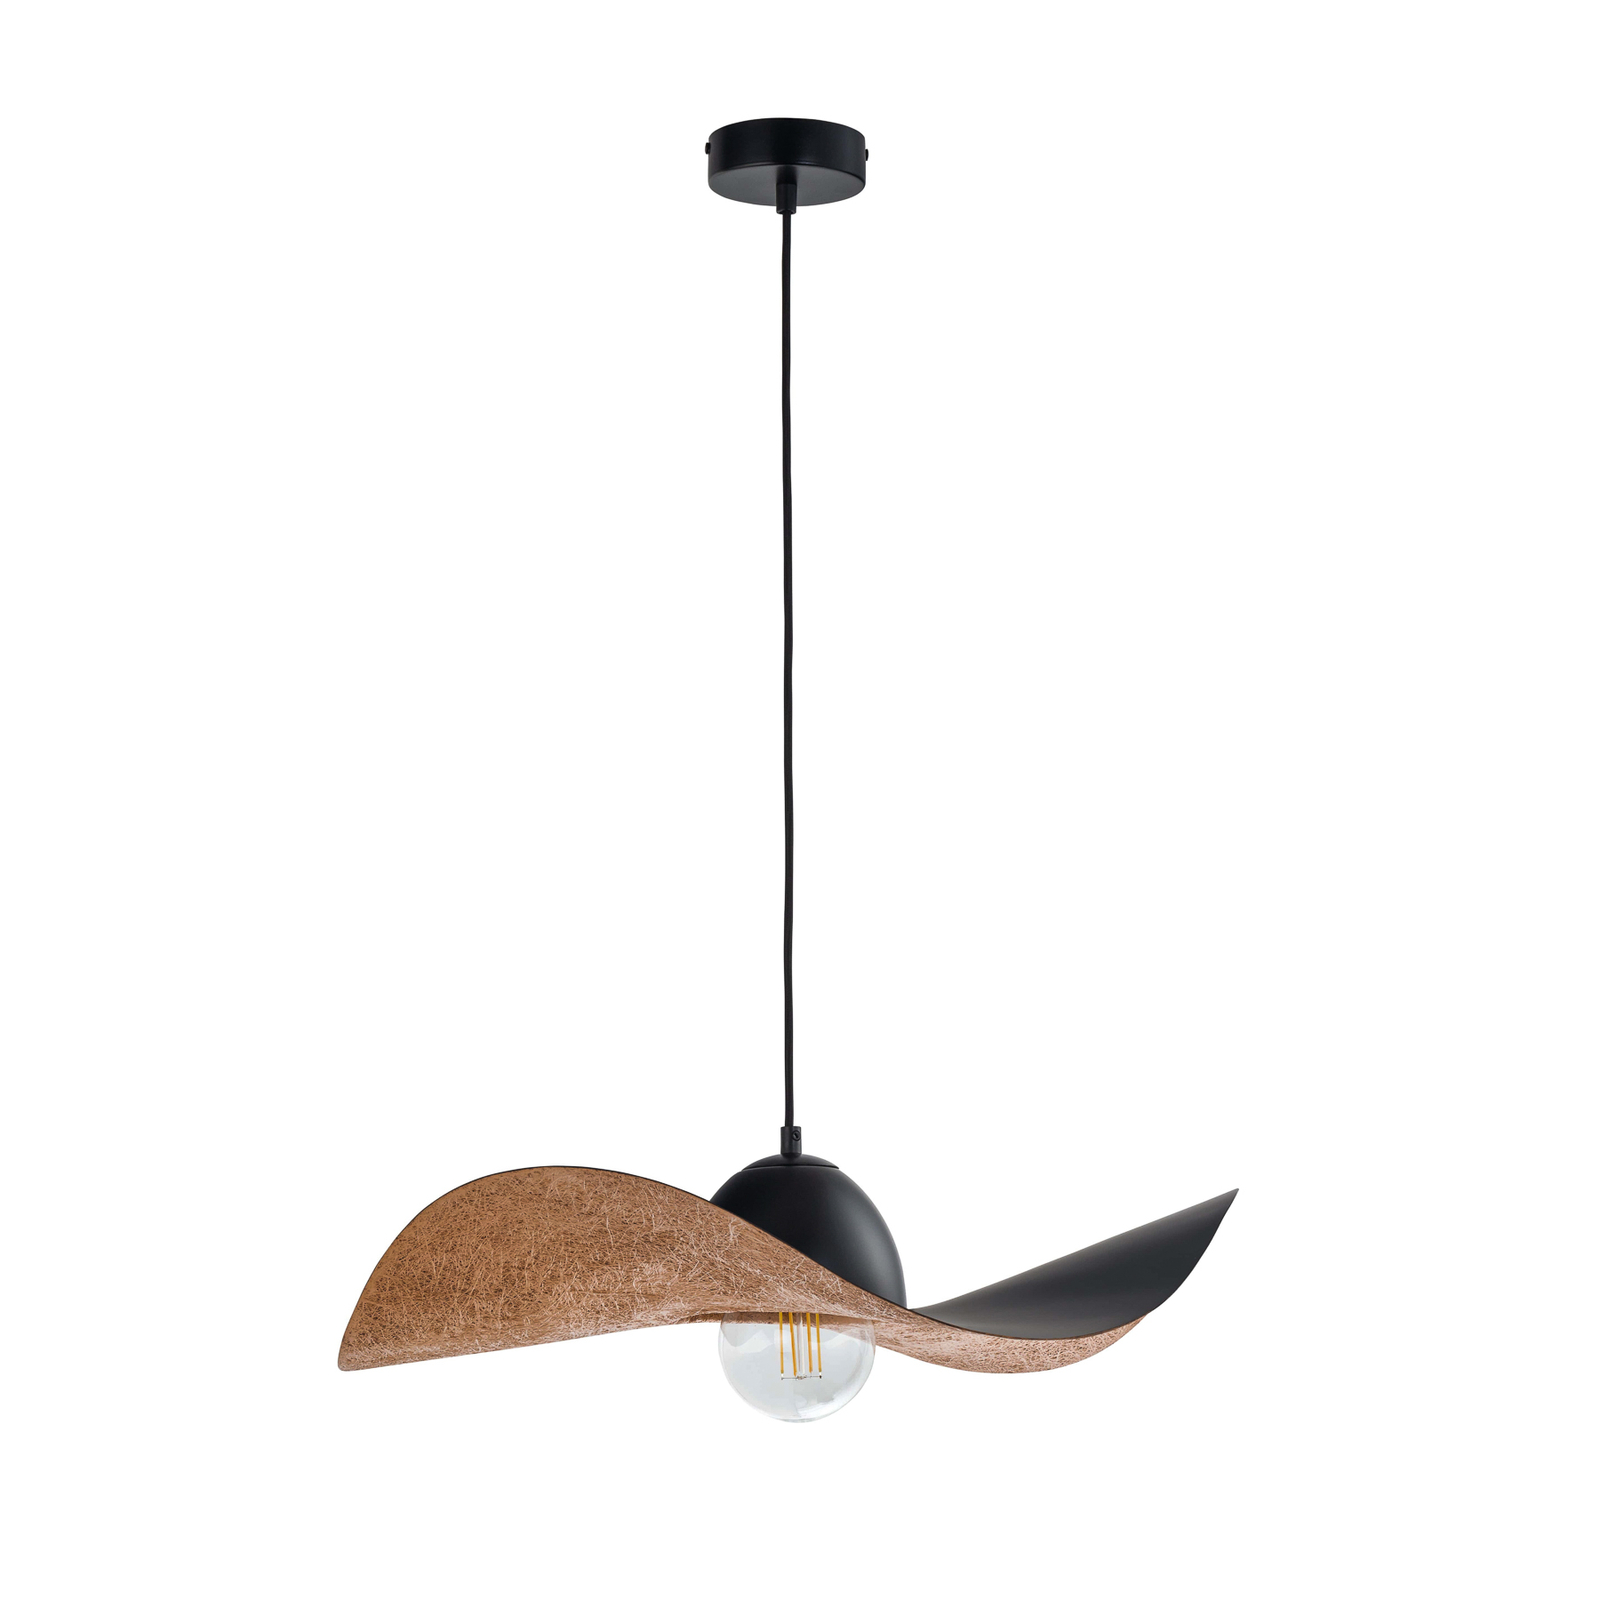 Jil hanging light, curved lampshade, black/copper